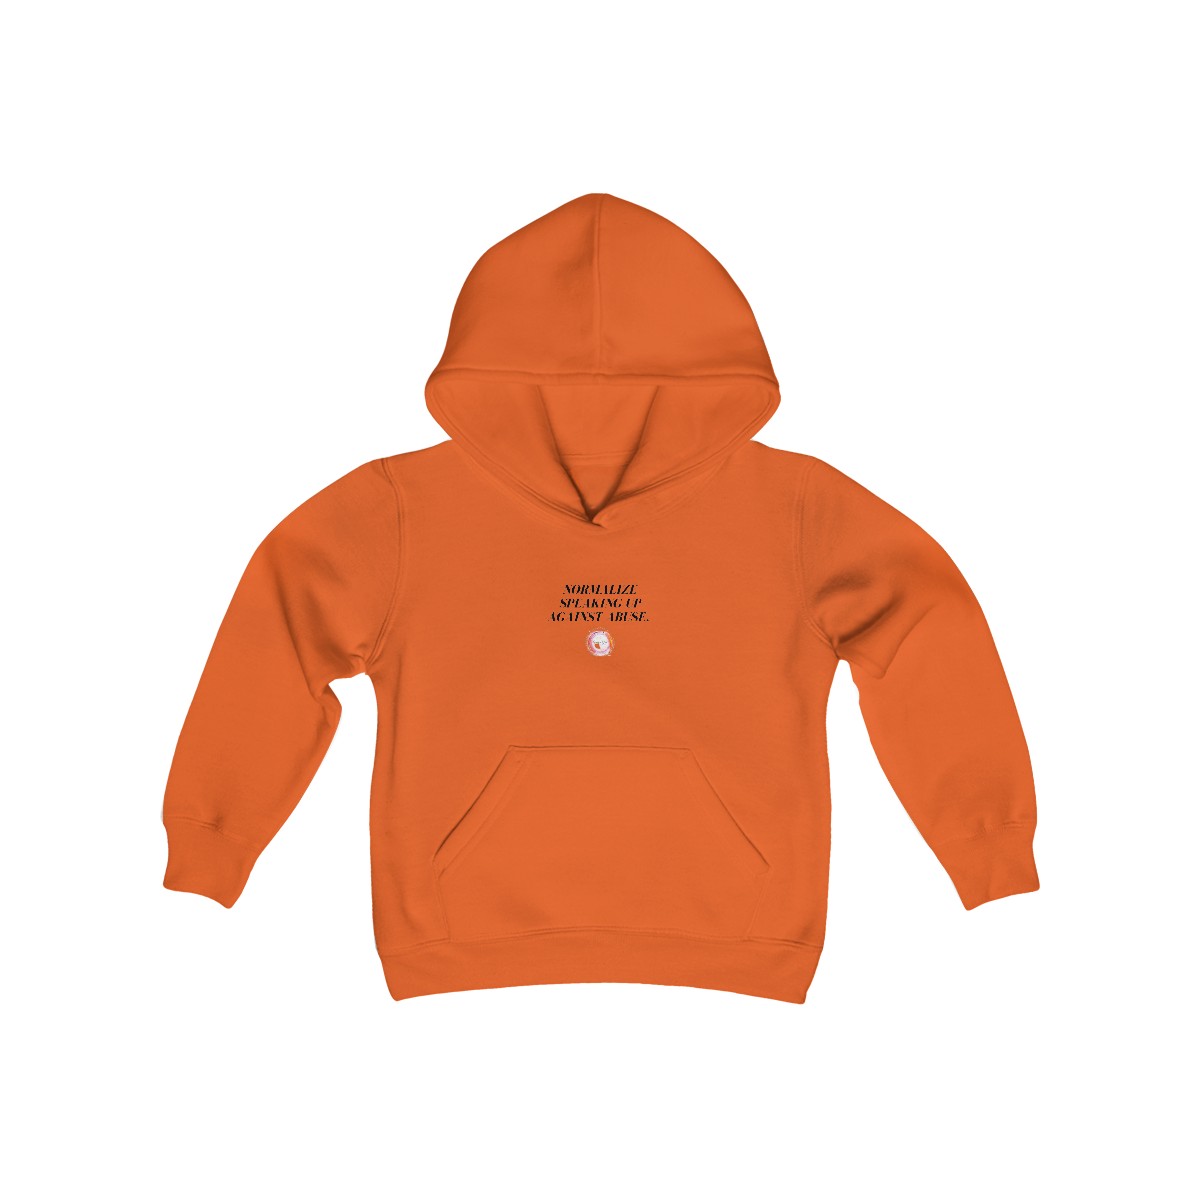 Youth Heavy Blend Hooded Sweatshirt product thumbnail image